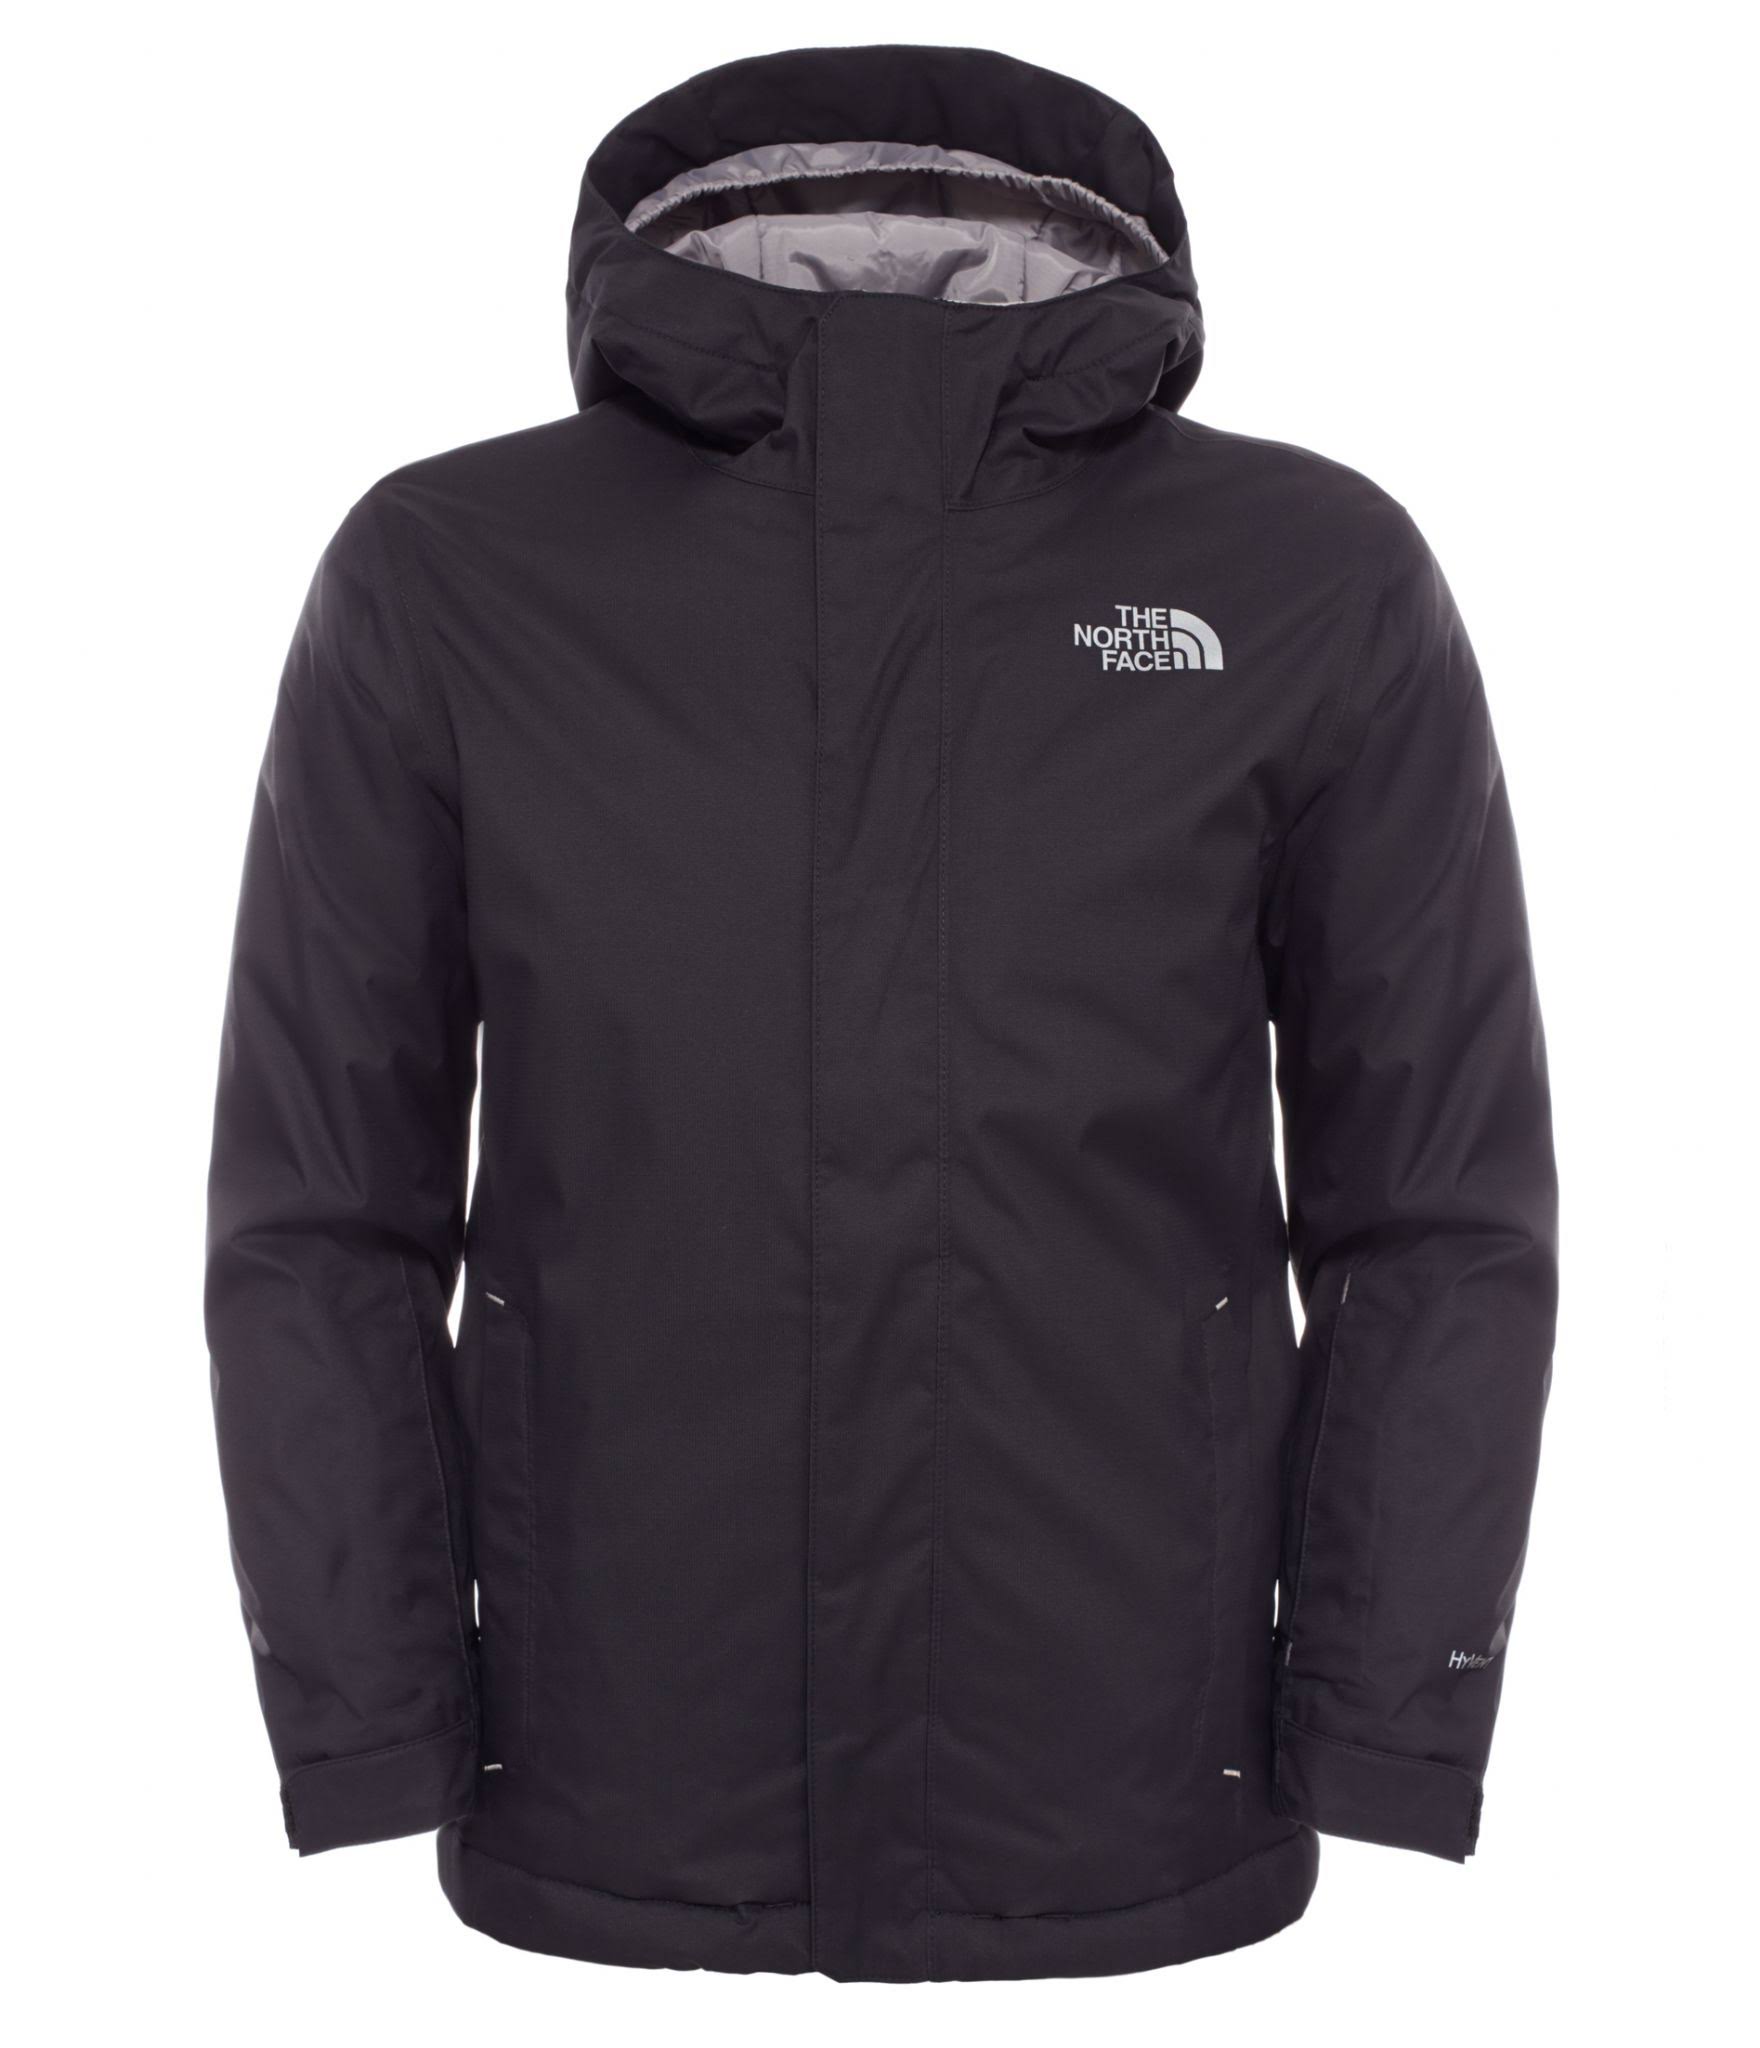 The North Face Youth Snowquest Jacket - TNF Black, X-Small